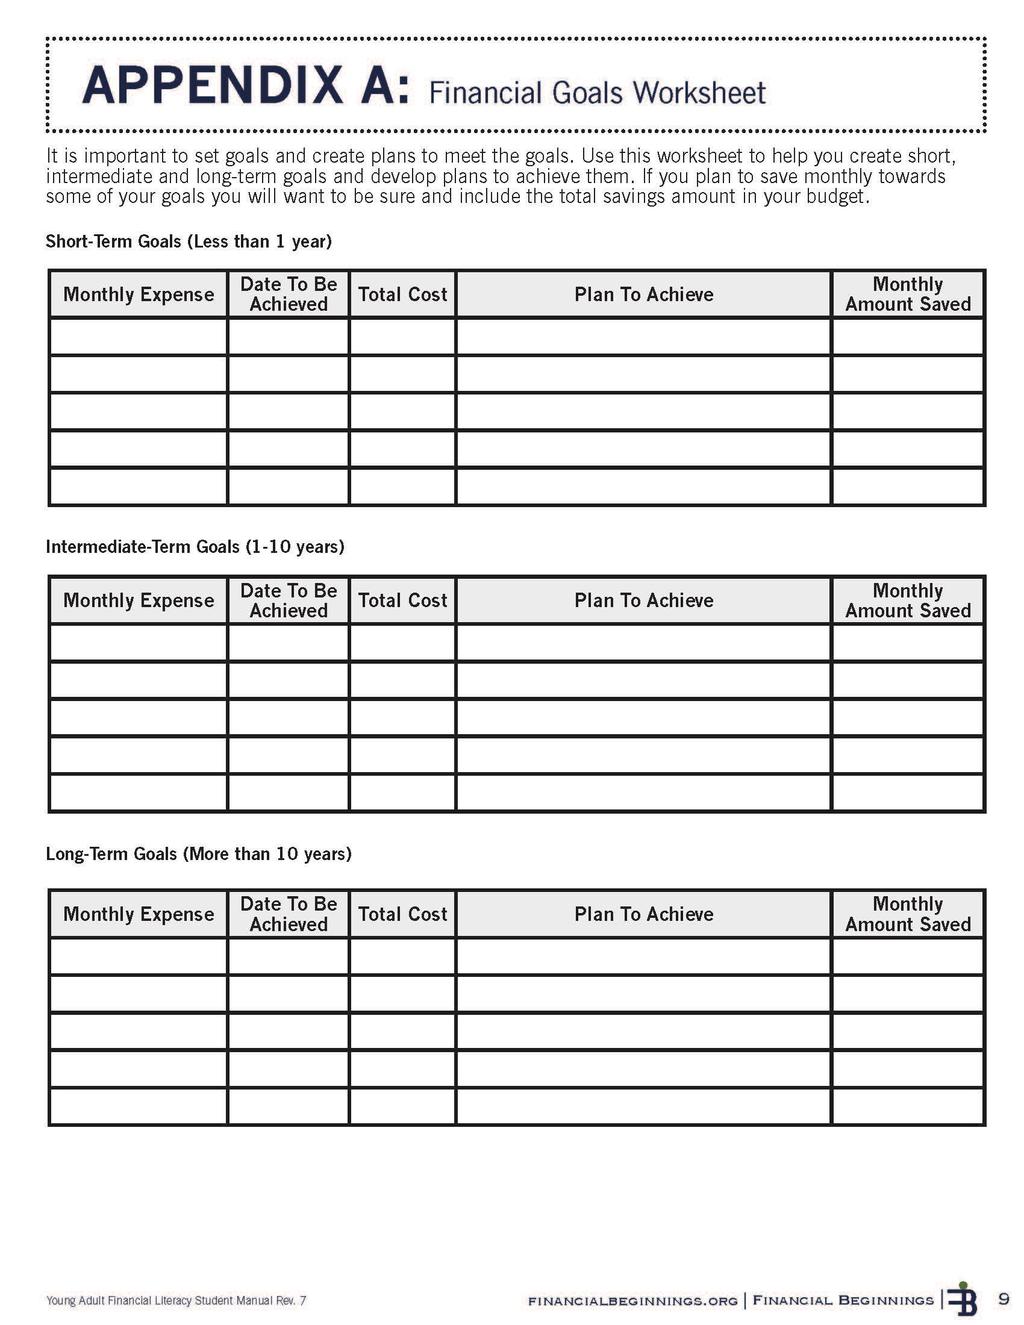 Appendix A: Financial Goals Worksheet on page 9 of the Resource Guide.